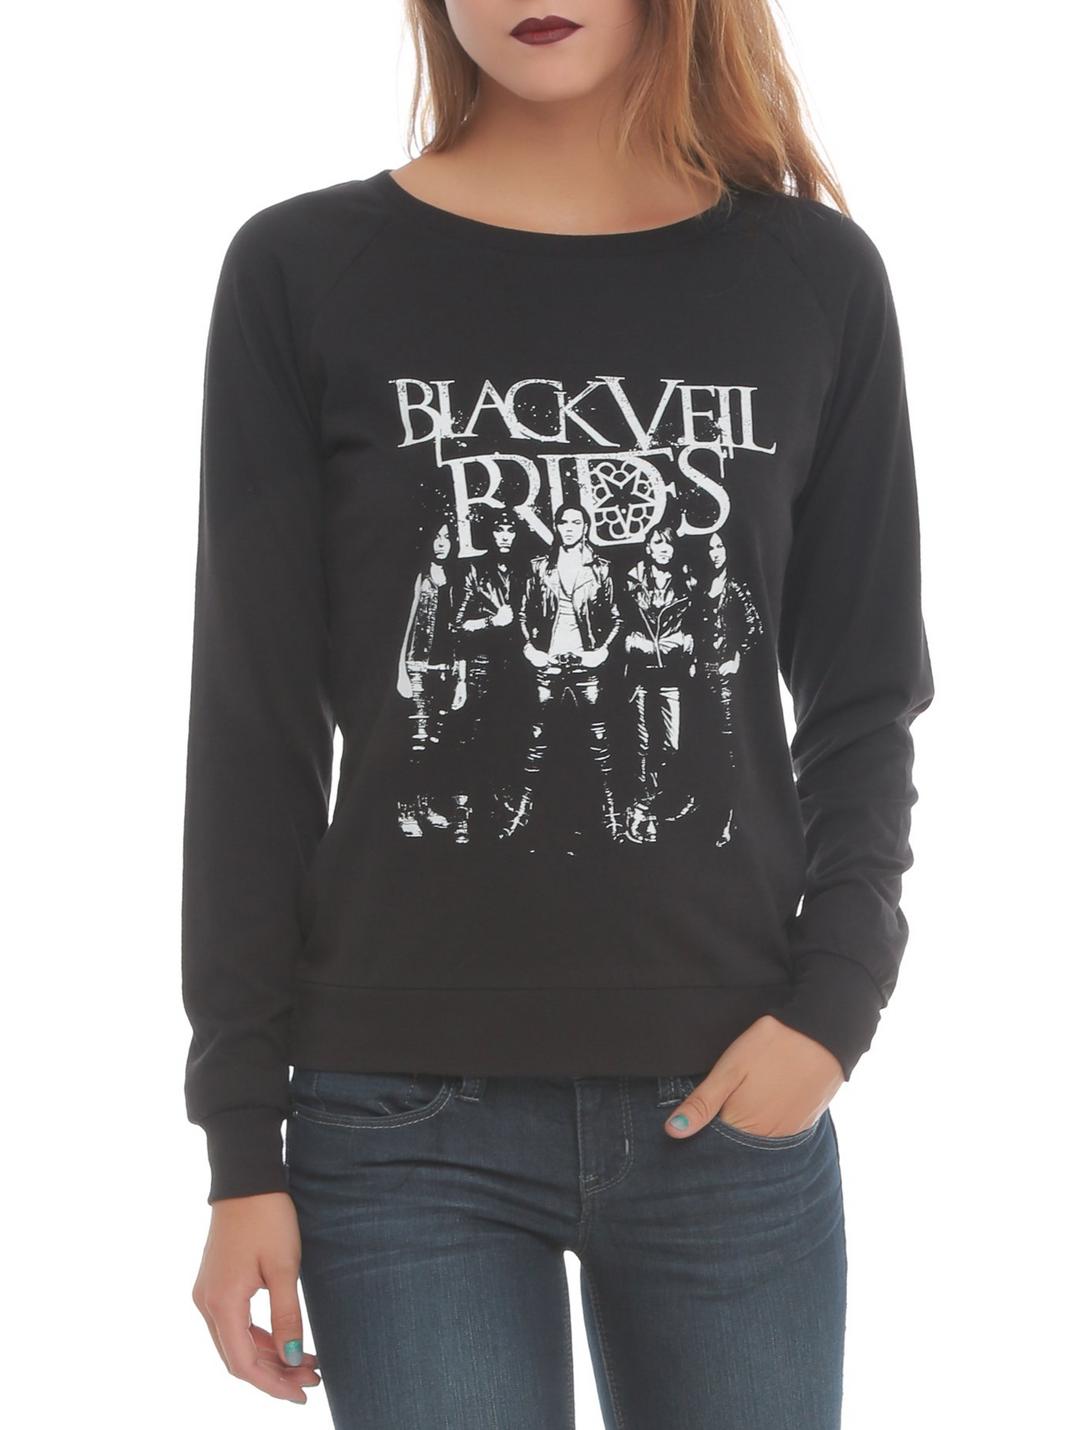 Black Veil Brides Group Girls Pullover Top | Hot Topic